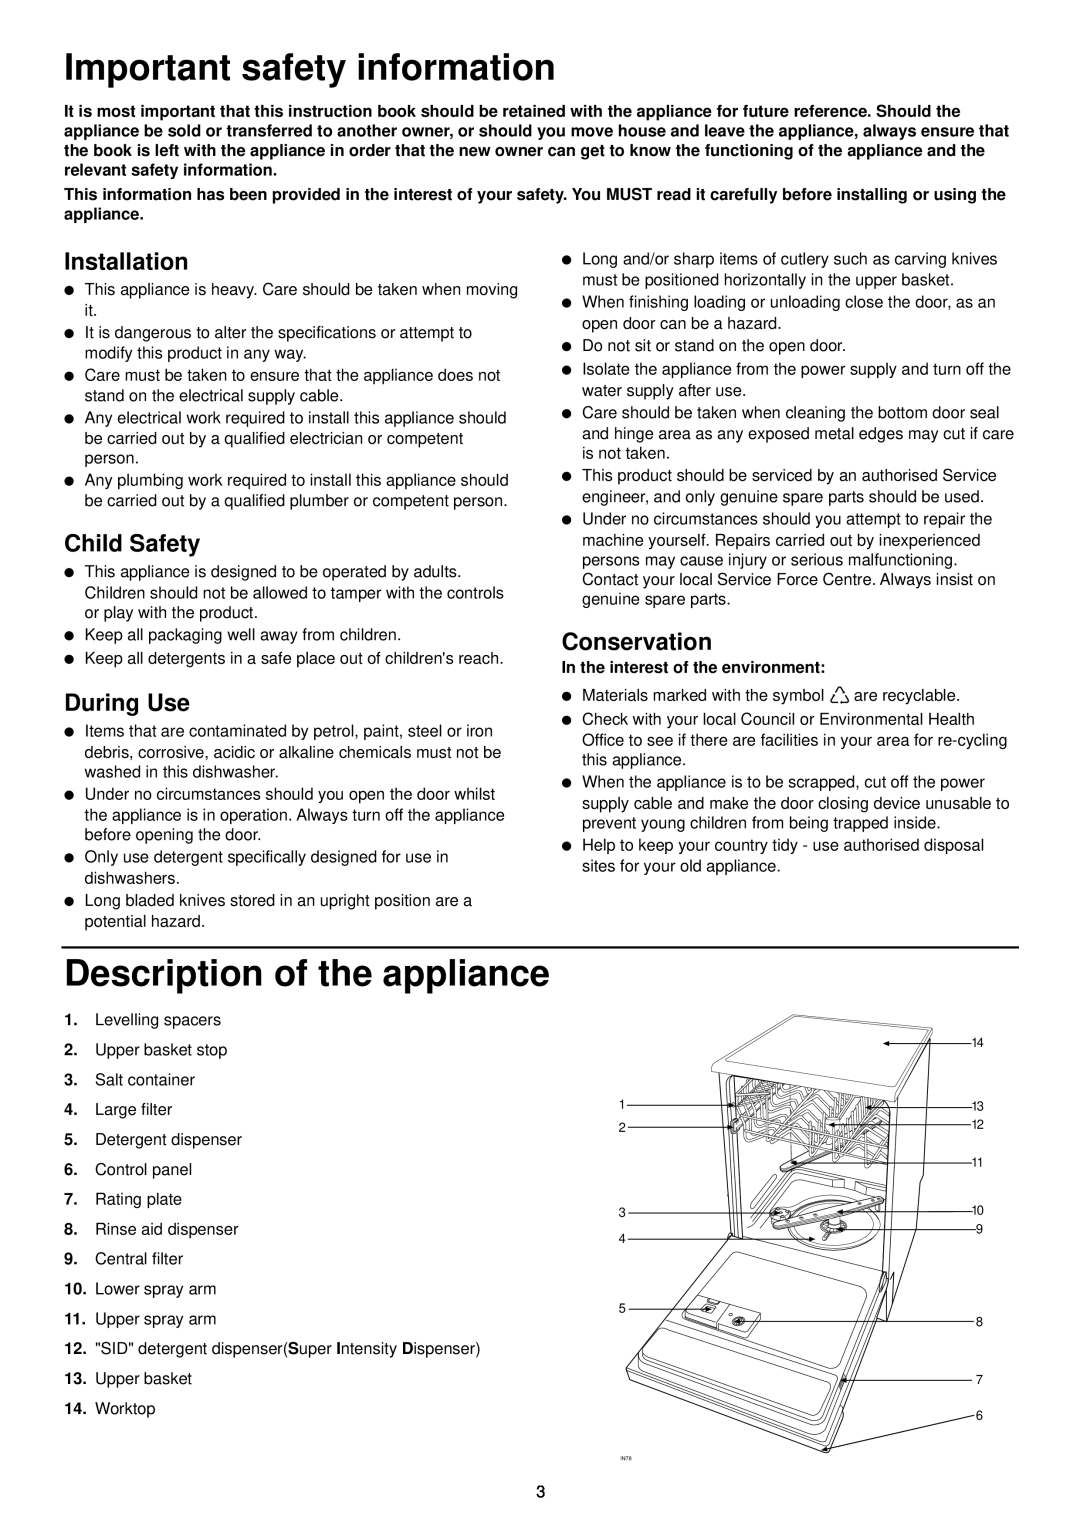 Zanussi DE 6850 manual Important safety information, Description of the appliance, Installation, Child Safety, During Use 